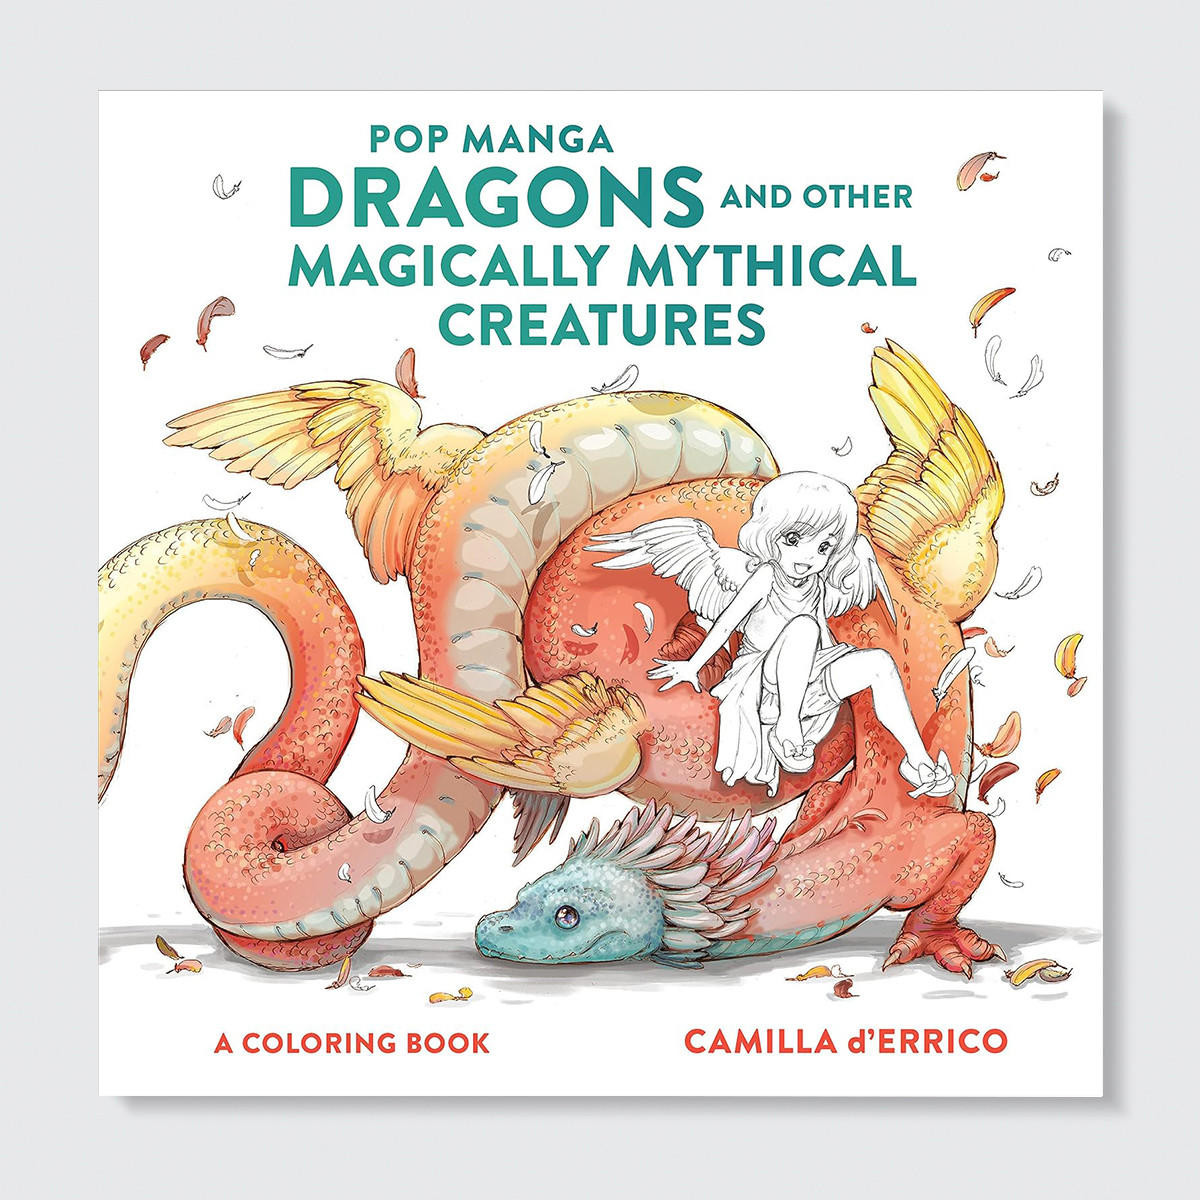 Watson-Guptill Pop Manga Dragons and Other Magically Mythical Creatures: A Coloring Book by Camilla d’Errico